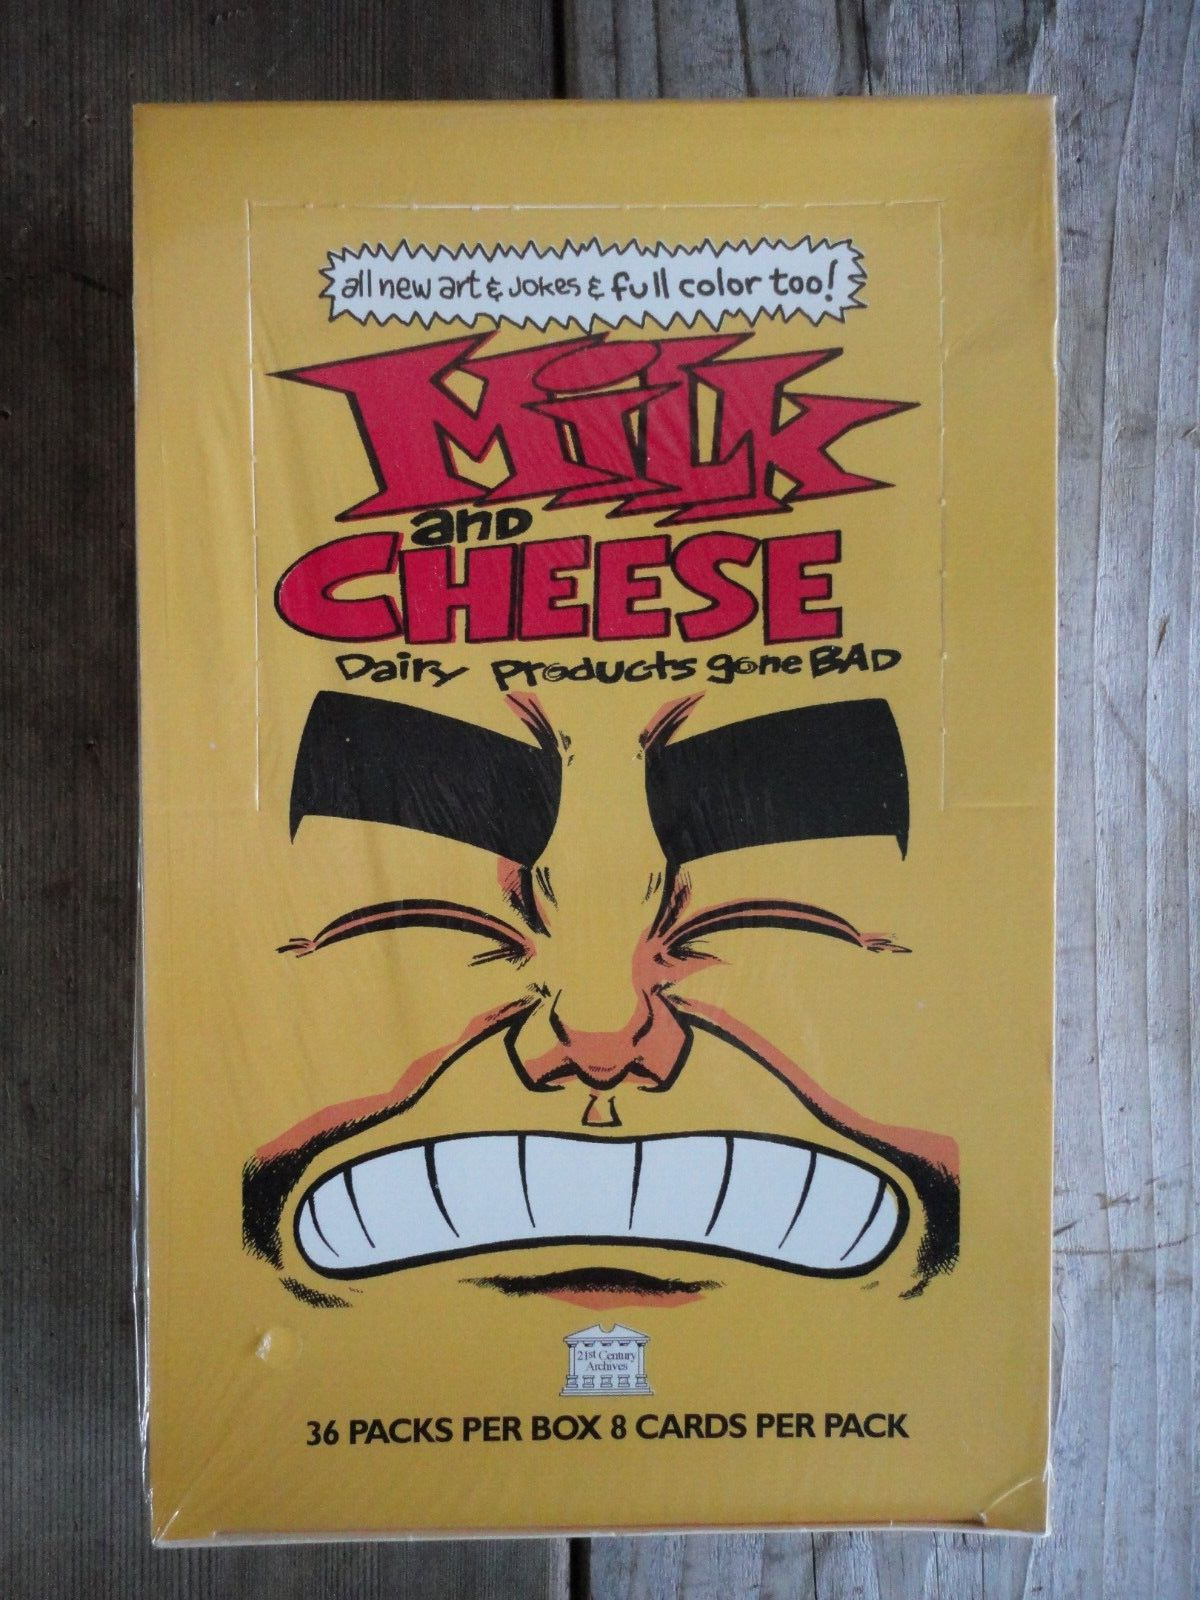 1995 Milk And Cheese Dairy Products Gone Bad Complete Box Factory Sealed Box NOS